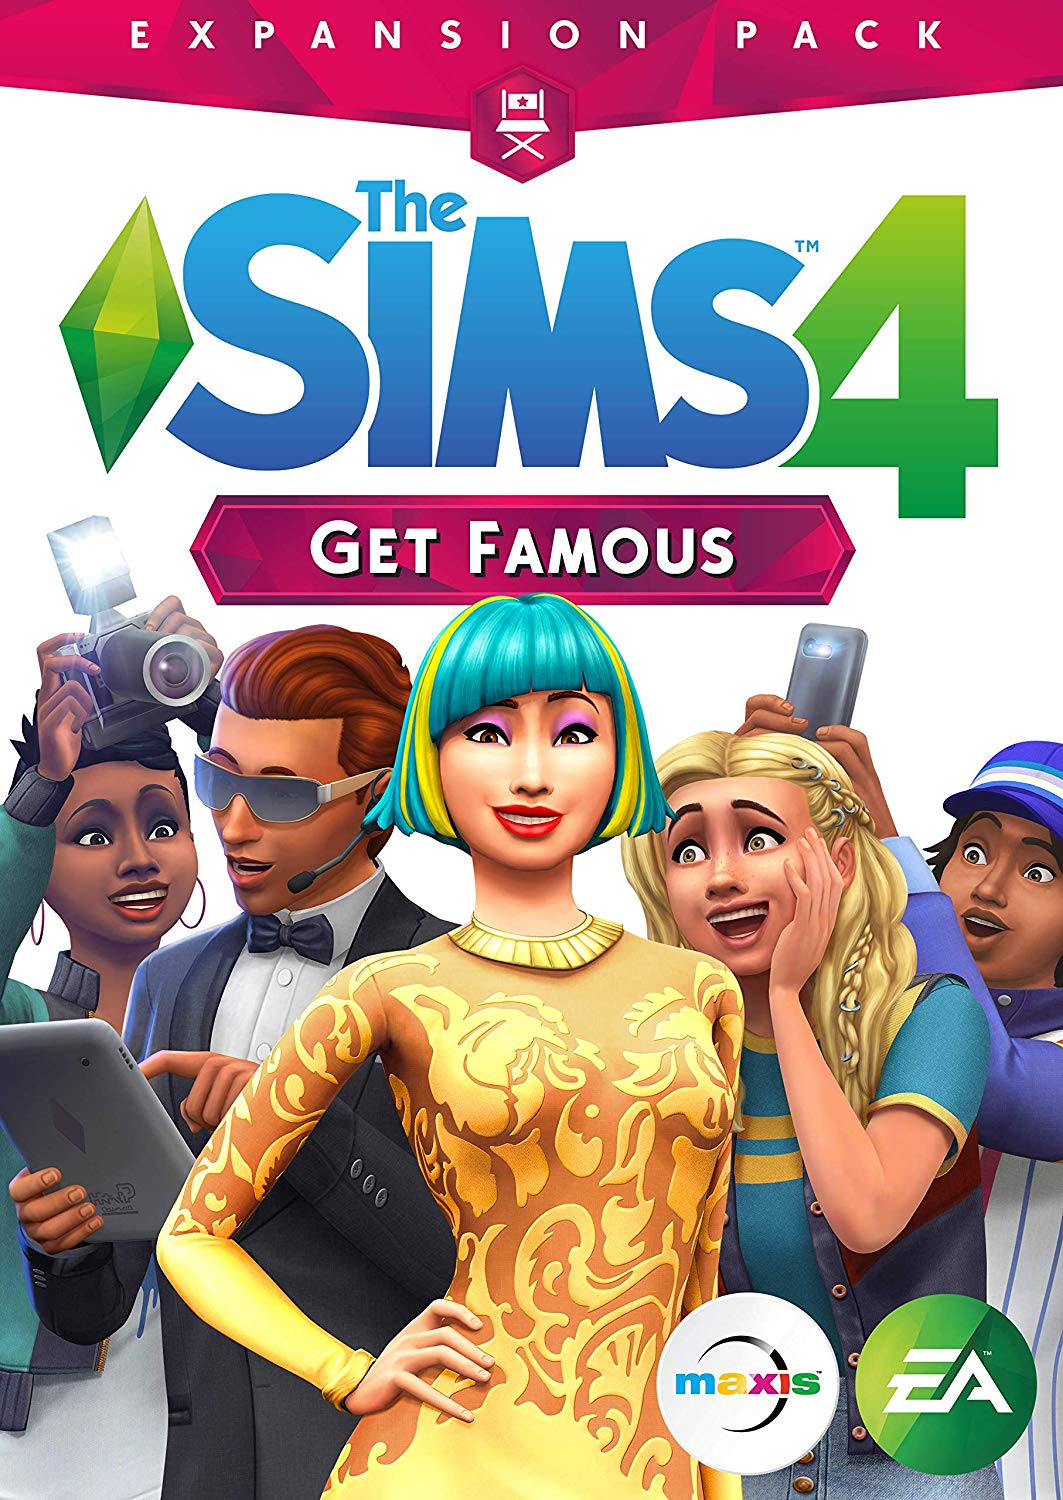 The Sims 4: Get Famous CD Key for Origin